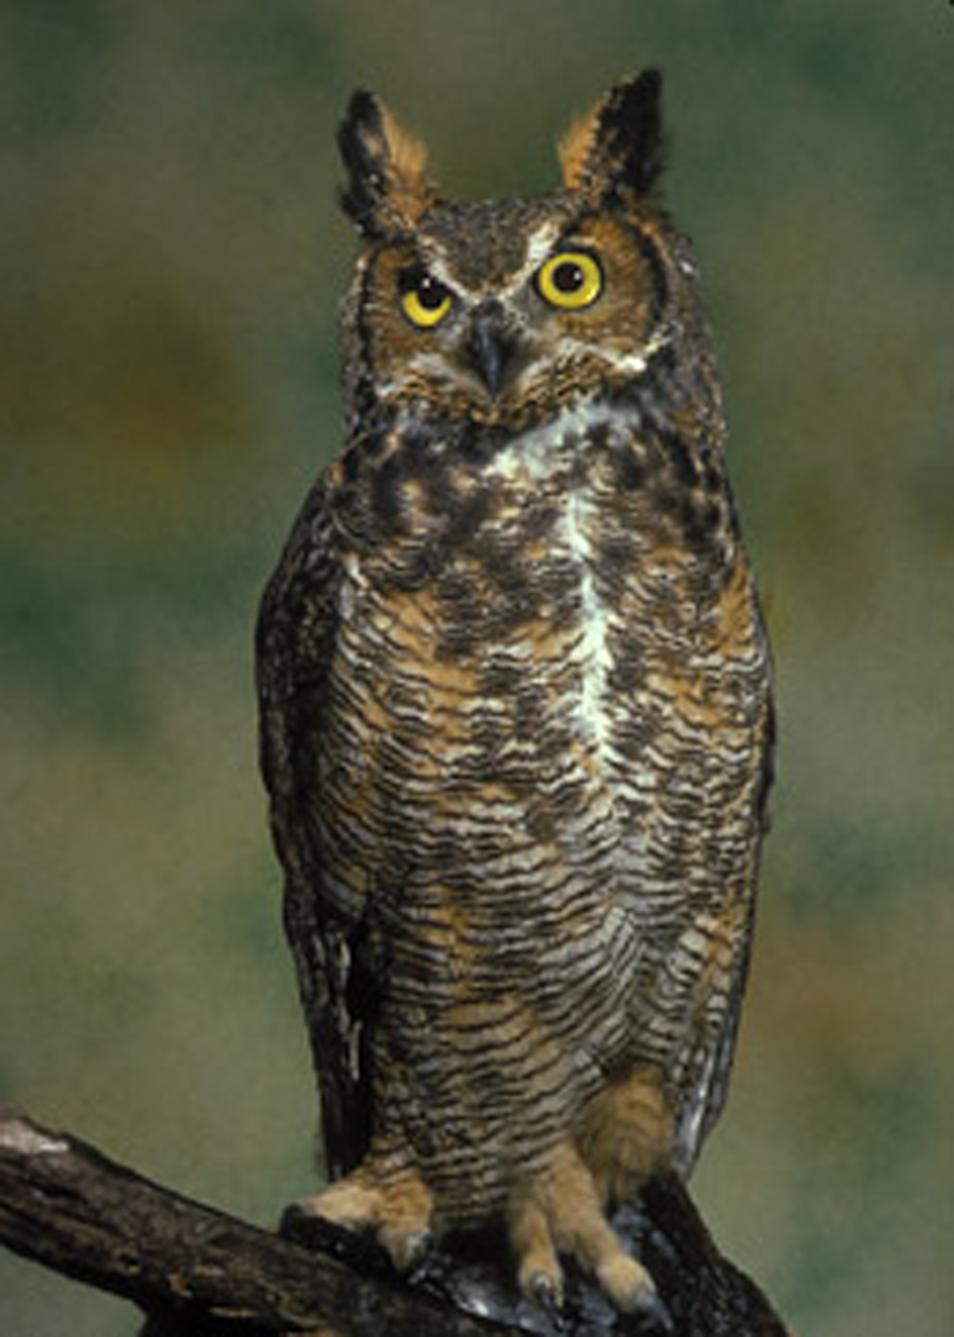 What Owl Species is Owlicious? Or what would you guess his